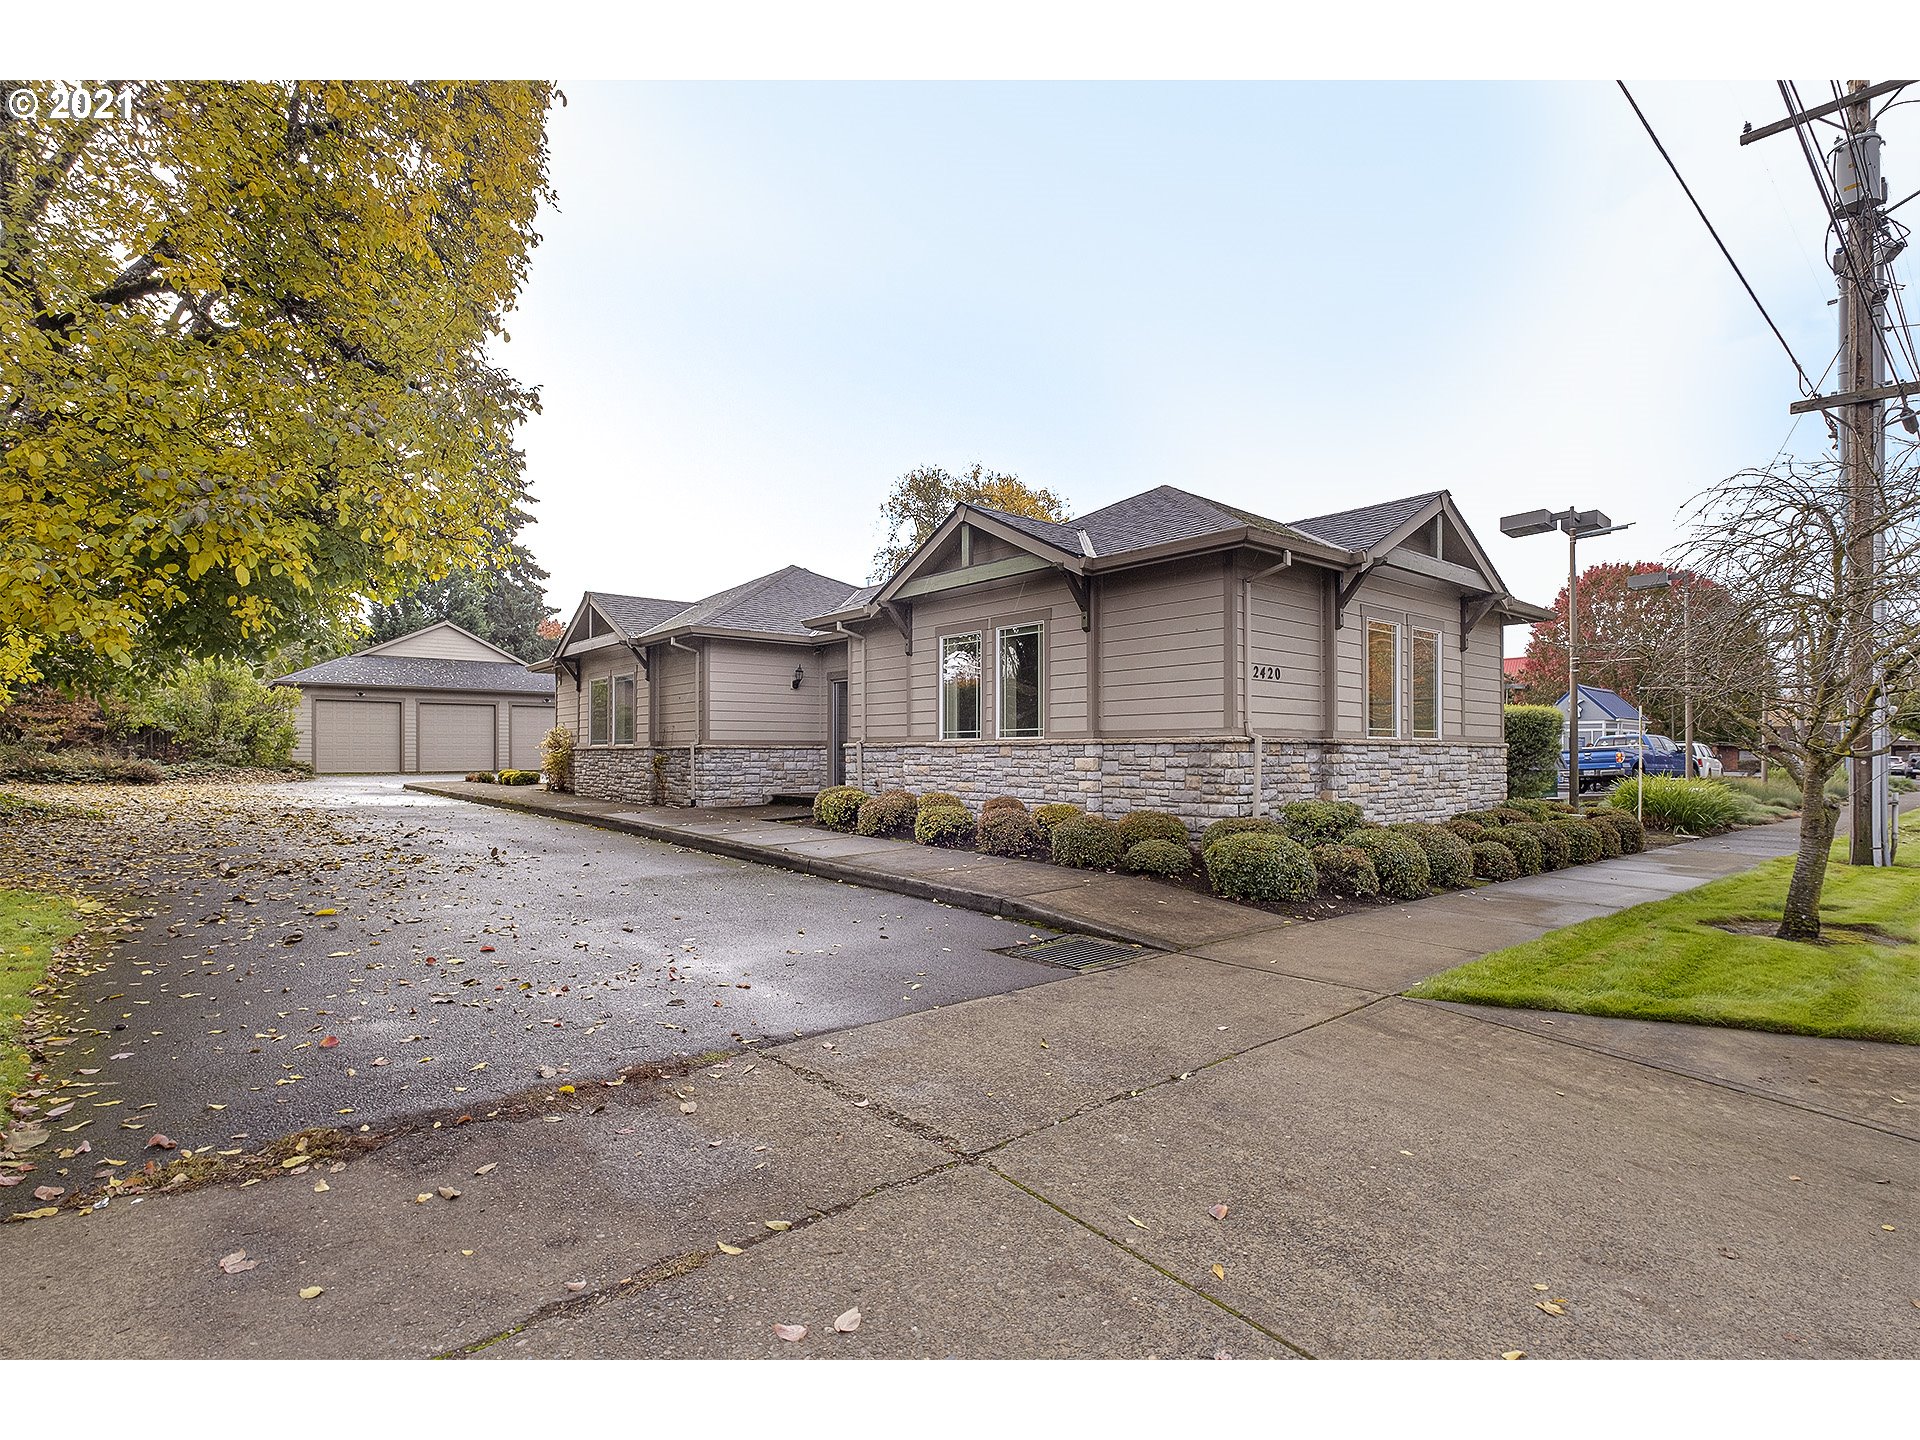 2420 PACIFIC AVE (1 of 17)